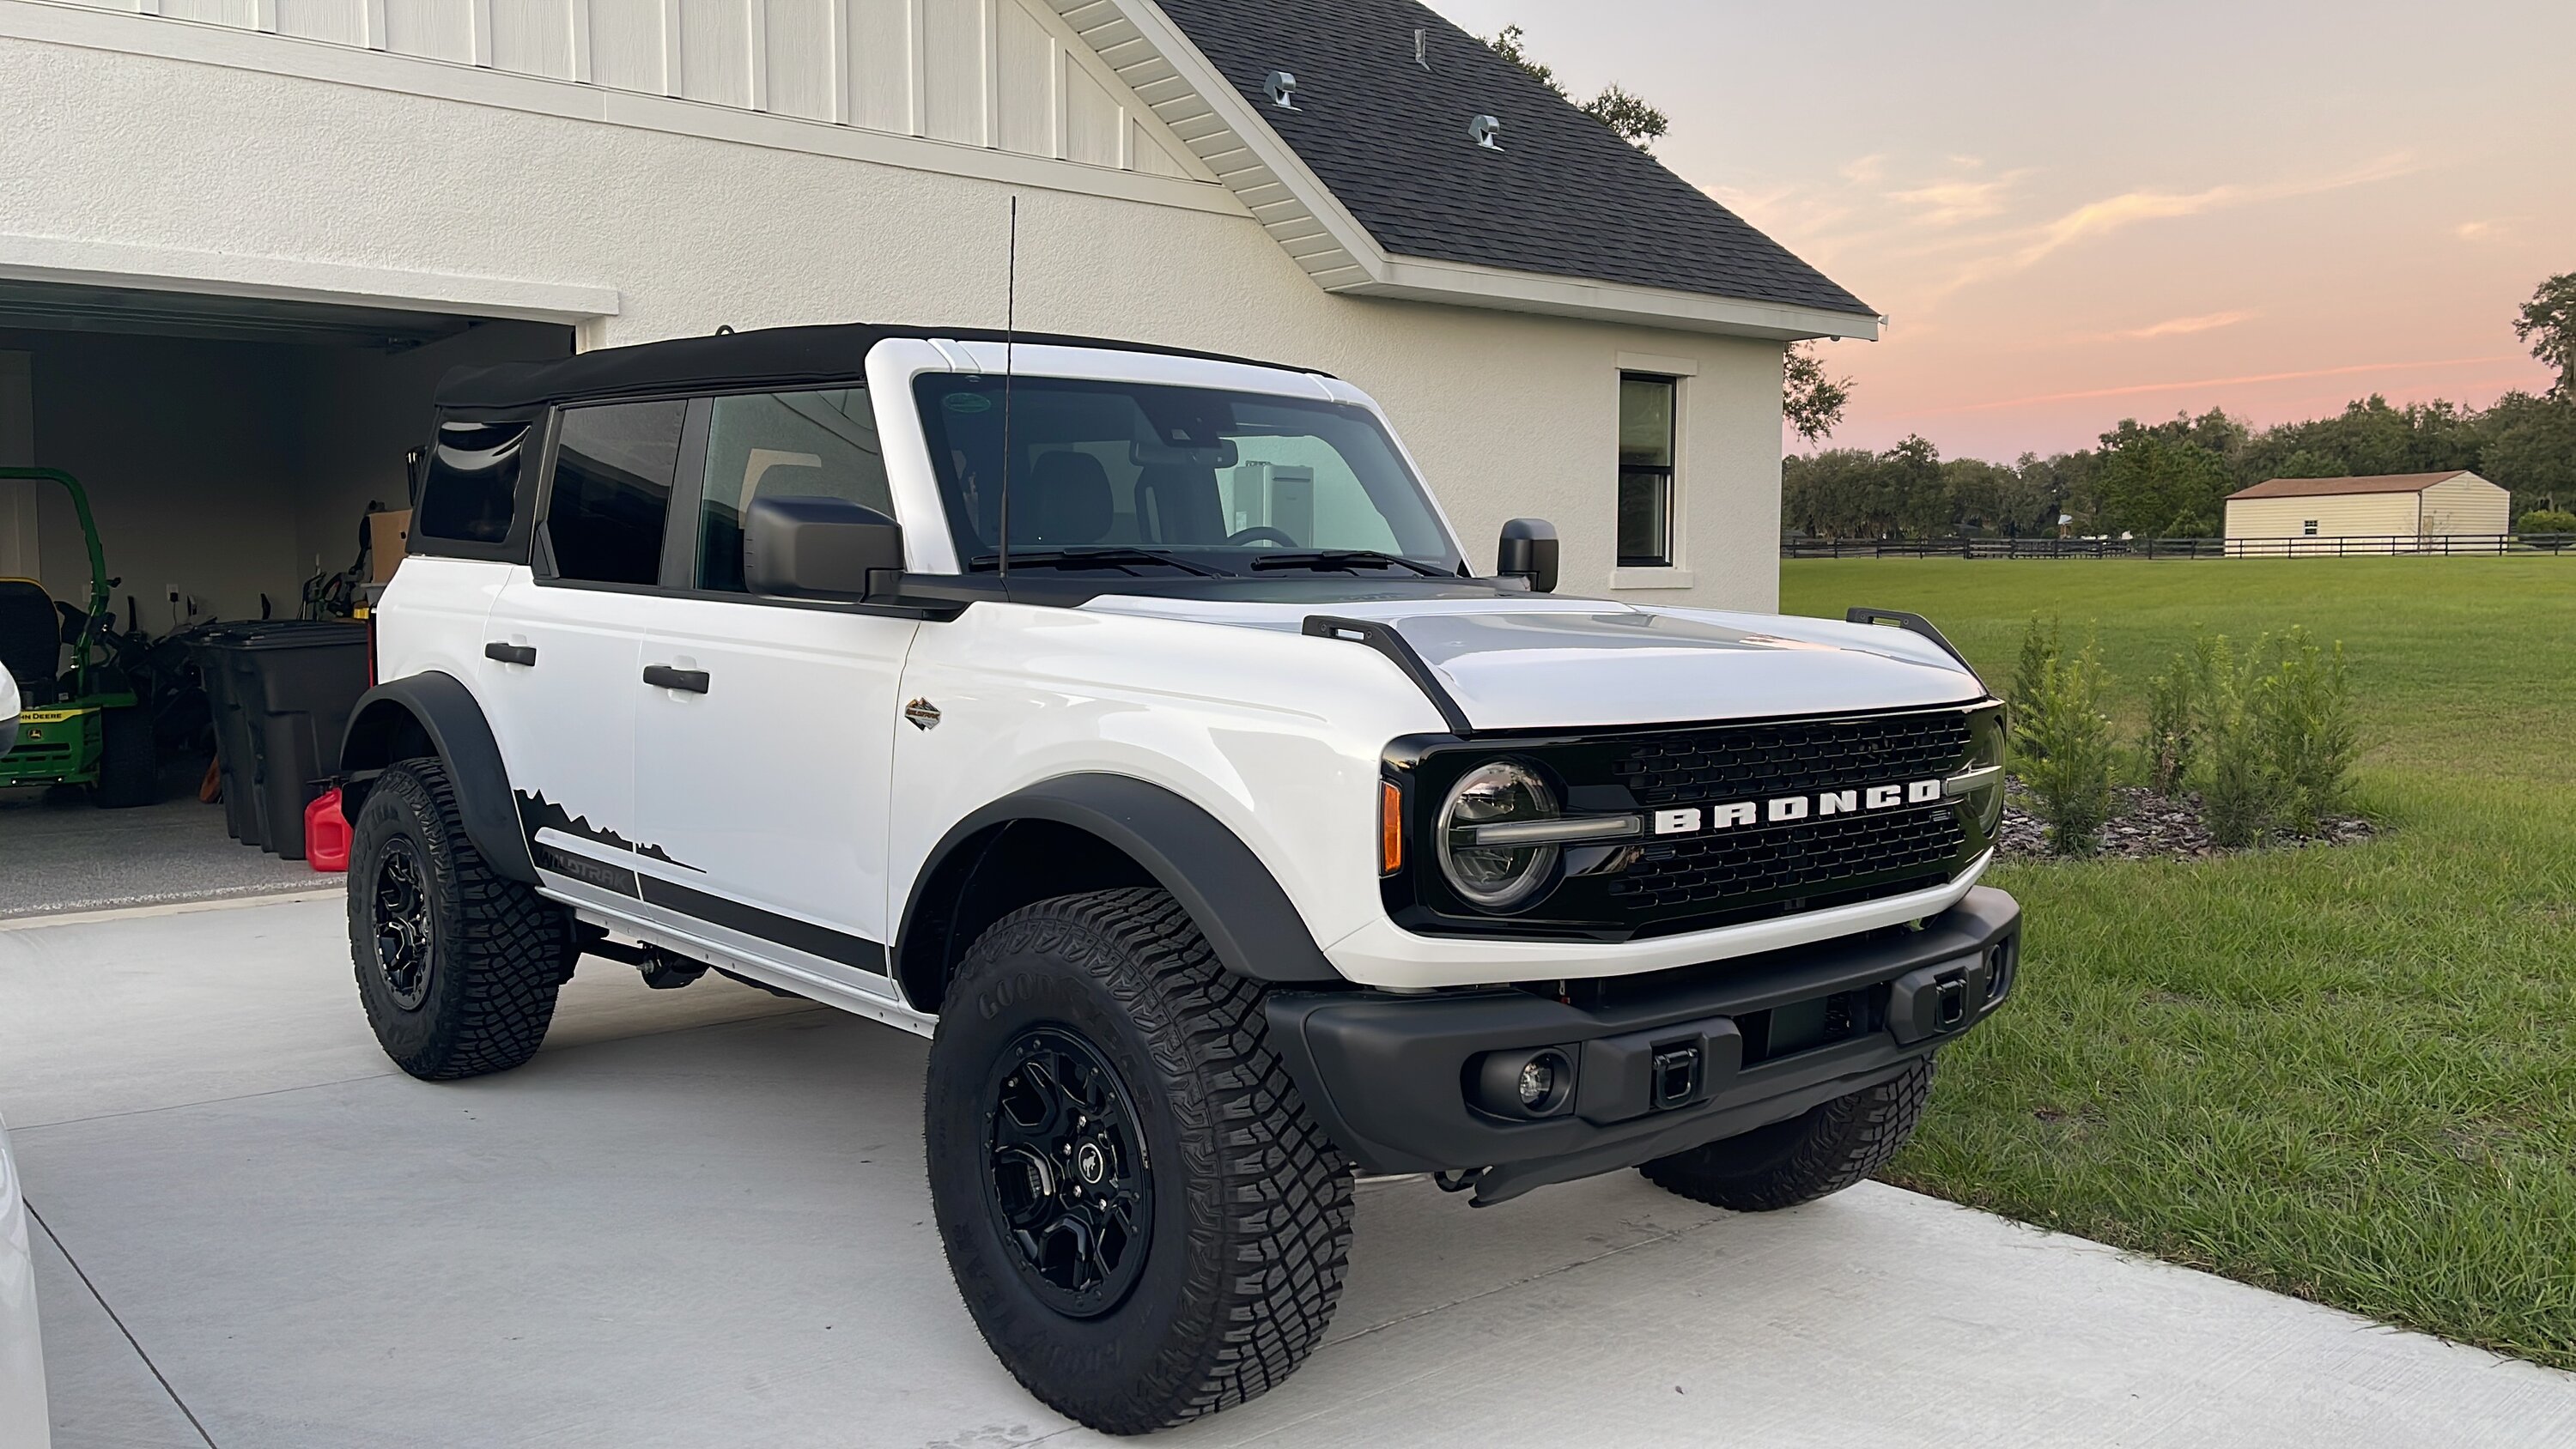 Ford Bronco New Wildtrak Owner in Central Florida! 8302DCD5-BBE5-4896-ACA1-9B1DED7FF3CA